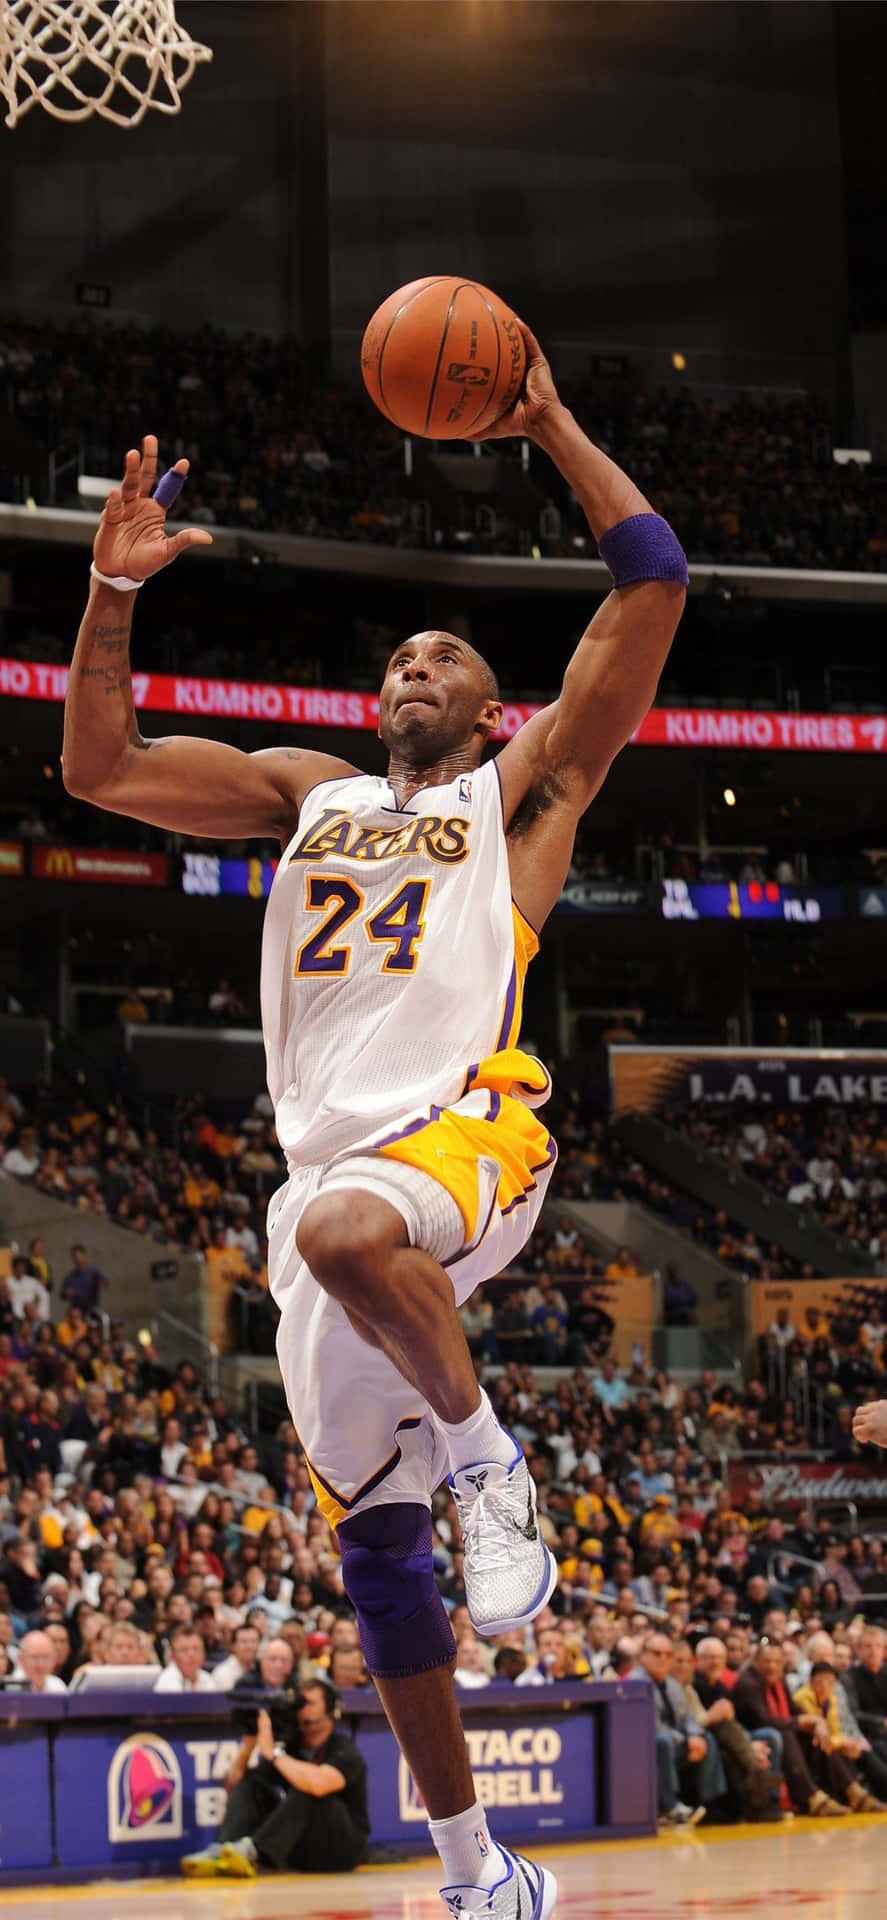 Kobe Bryant - The Best Basketball Player of All Time Wallpaper